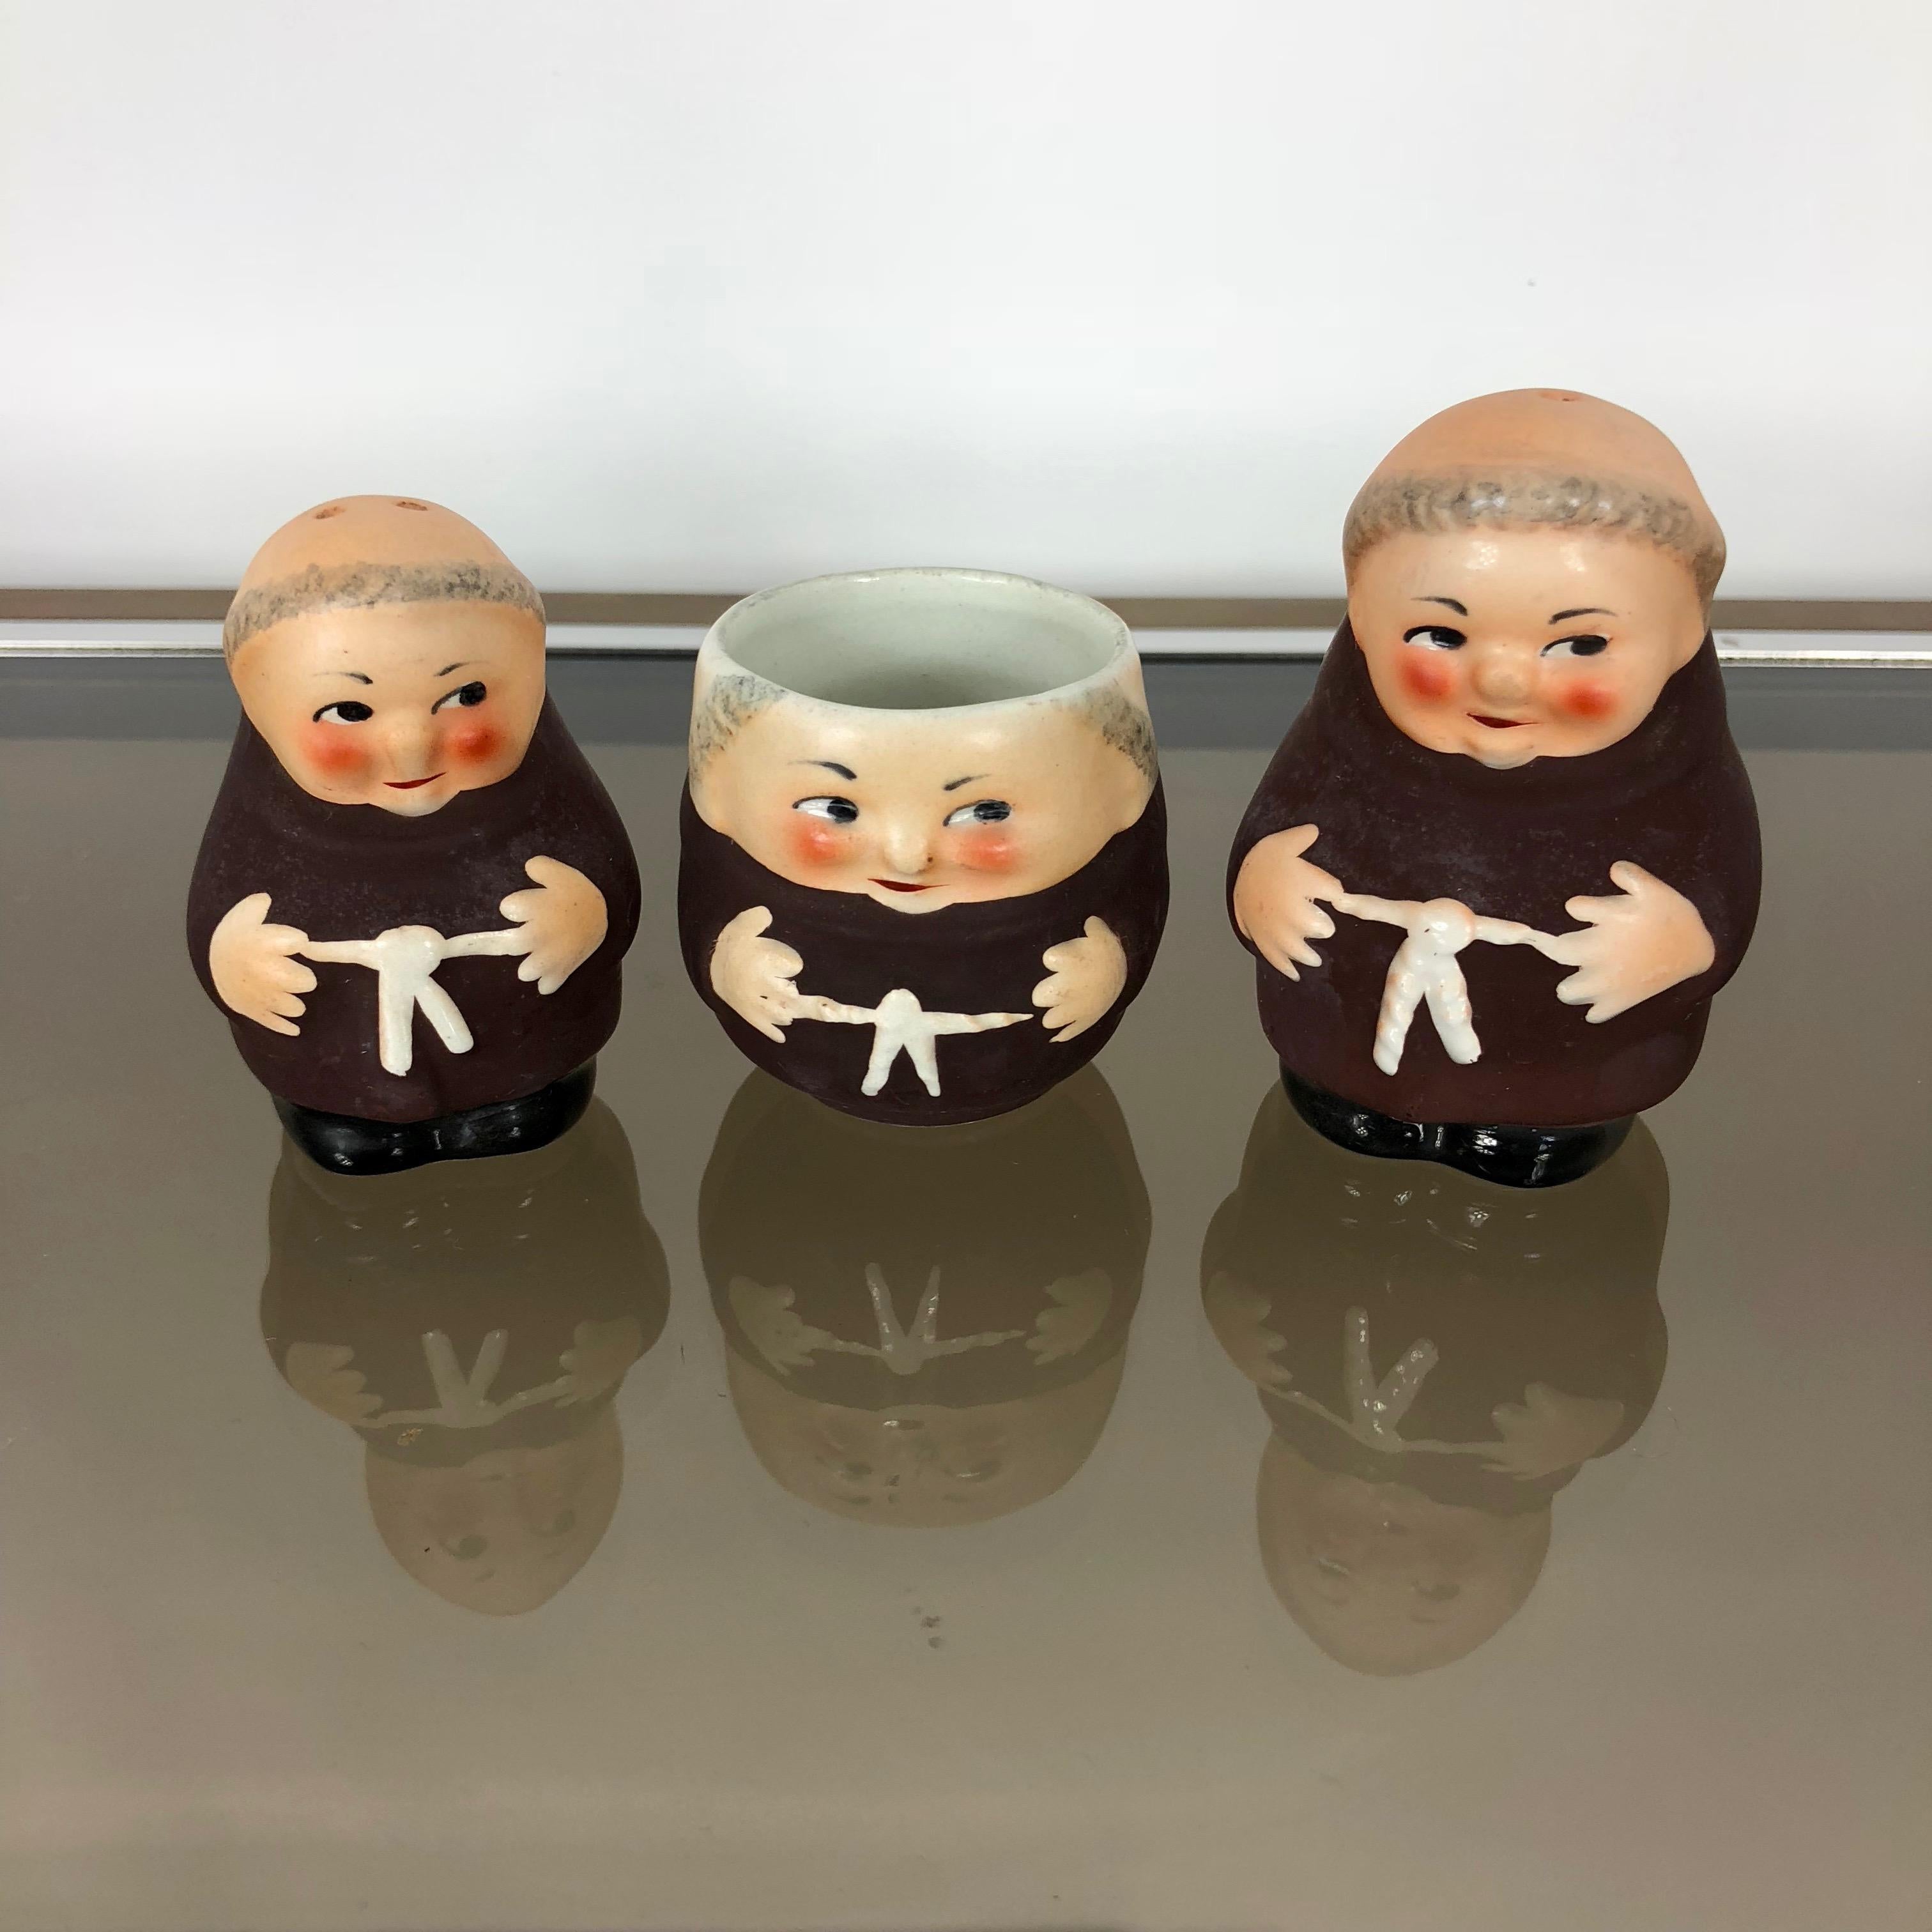 Porcelain Friars Salt and Pepper Set by Deruta Fratelli Niccacci In Good Condition For Sale In Rome, IT